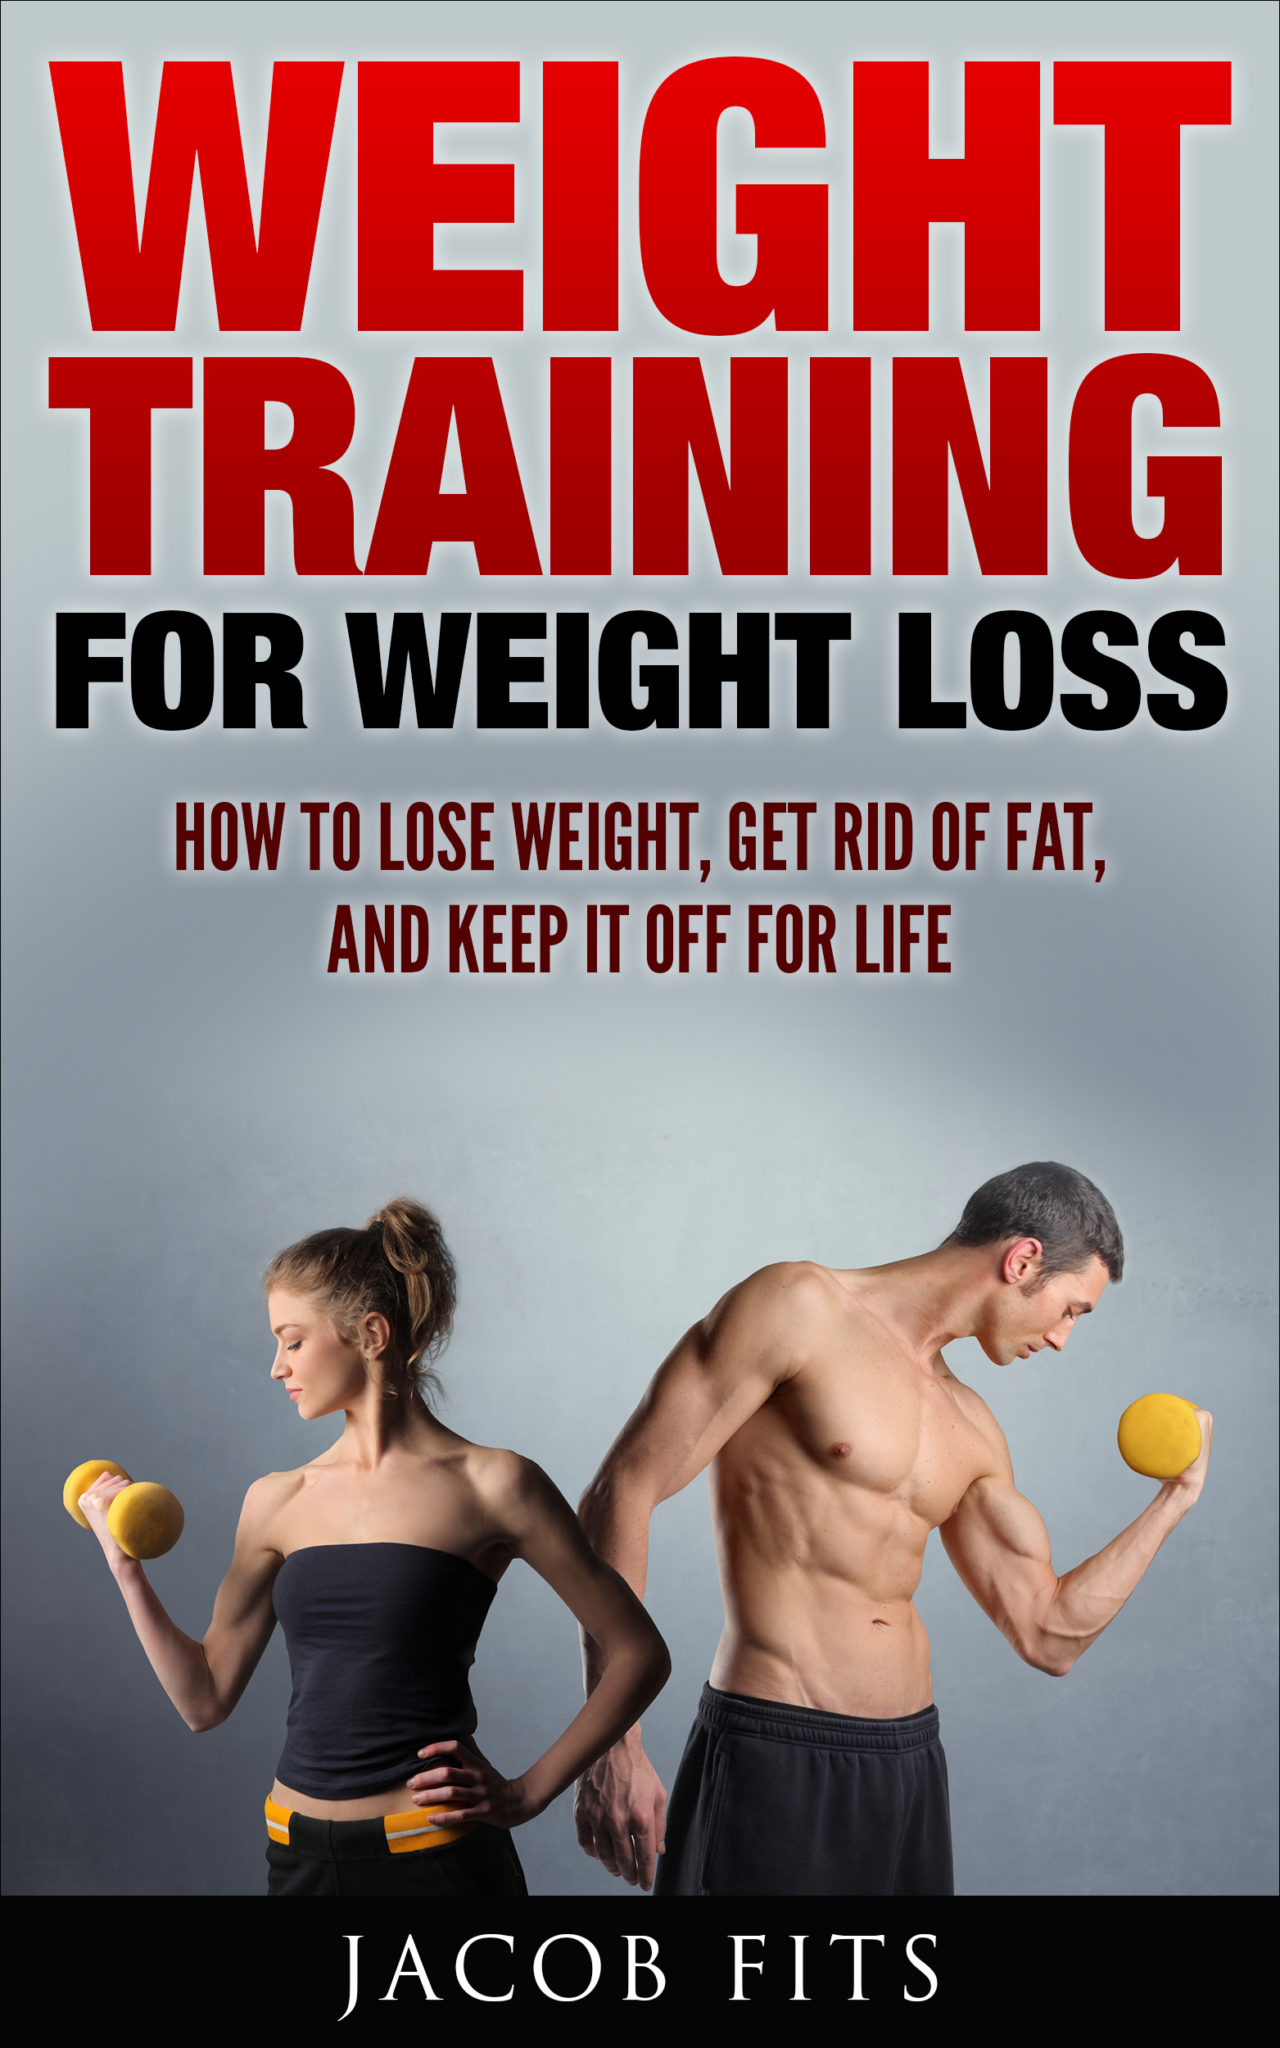 FREE: WEIGHT TRAINING: How to lose weight, get rid of fat, and keep it off for life. by Jacob Fits